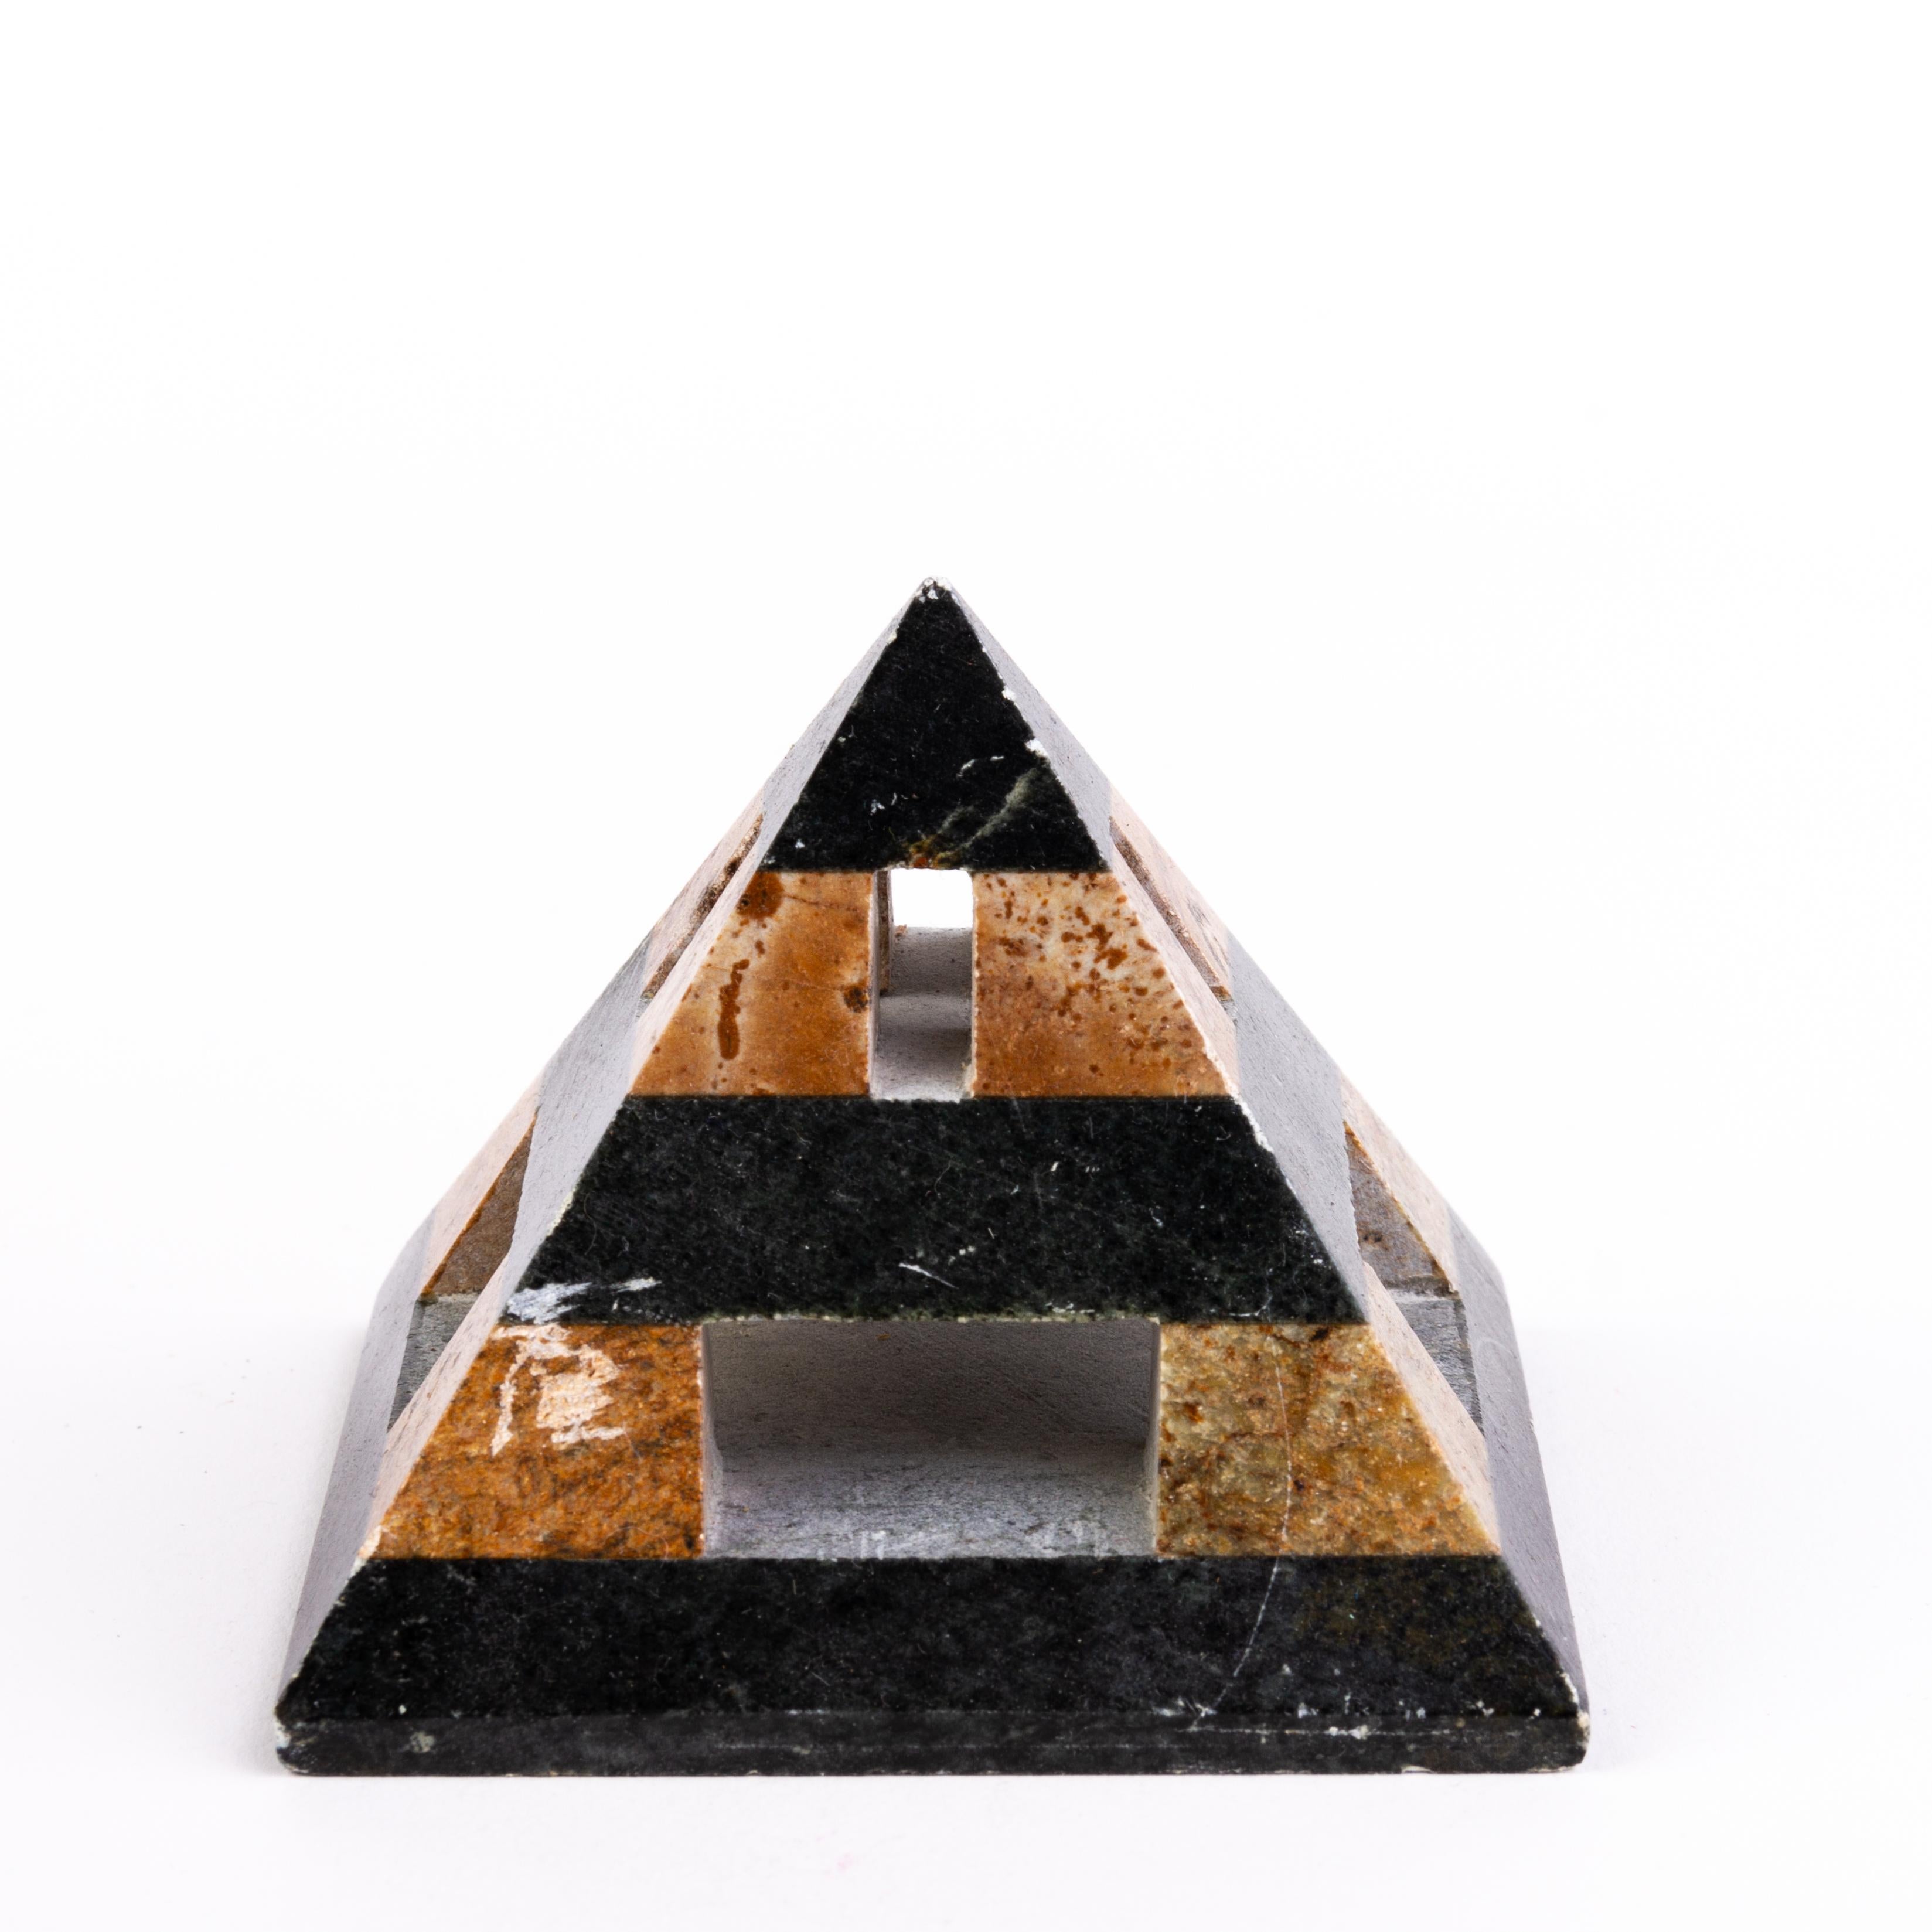 In good condition
From a private collection
Free international shipping
Grand Tour Geode Specimen Pyramid Desk Paperweight 